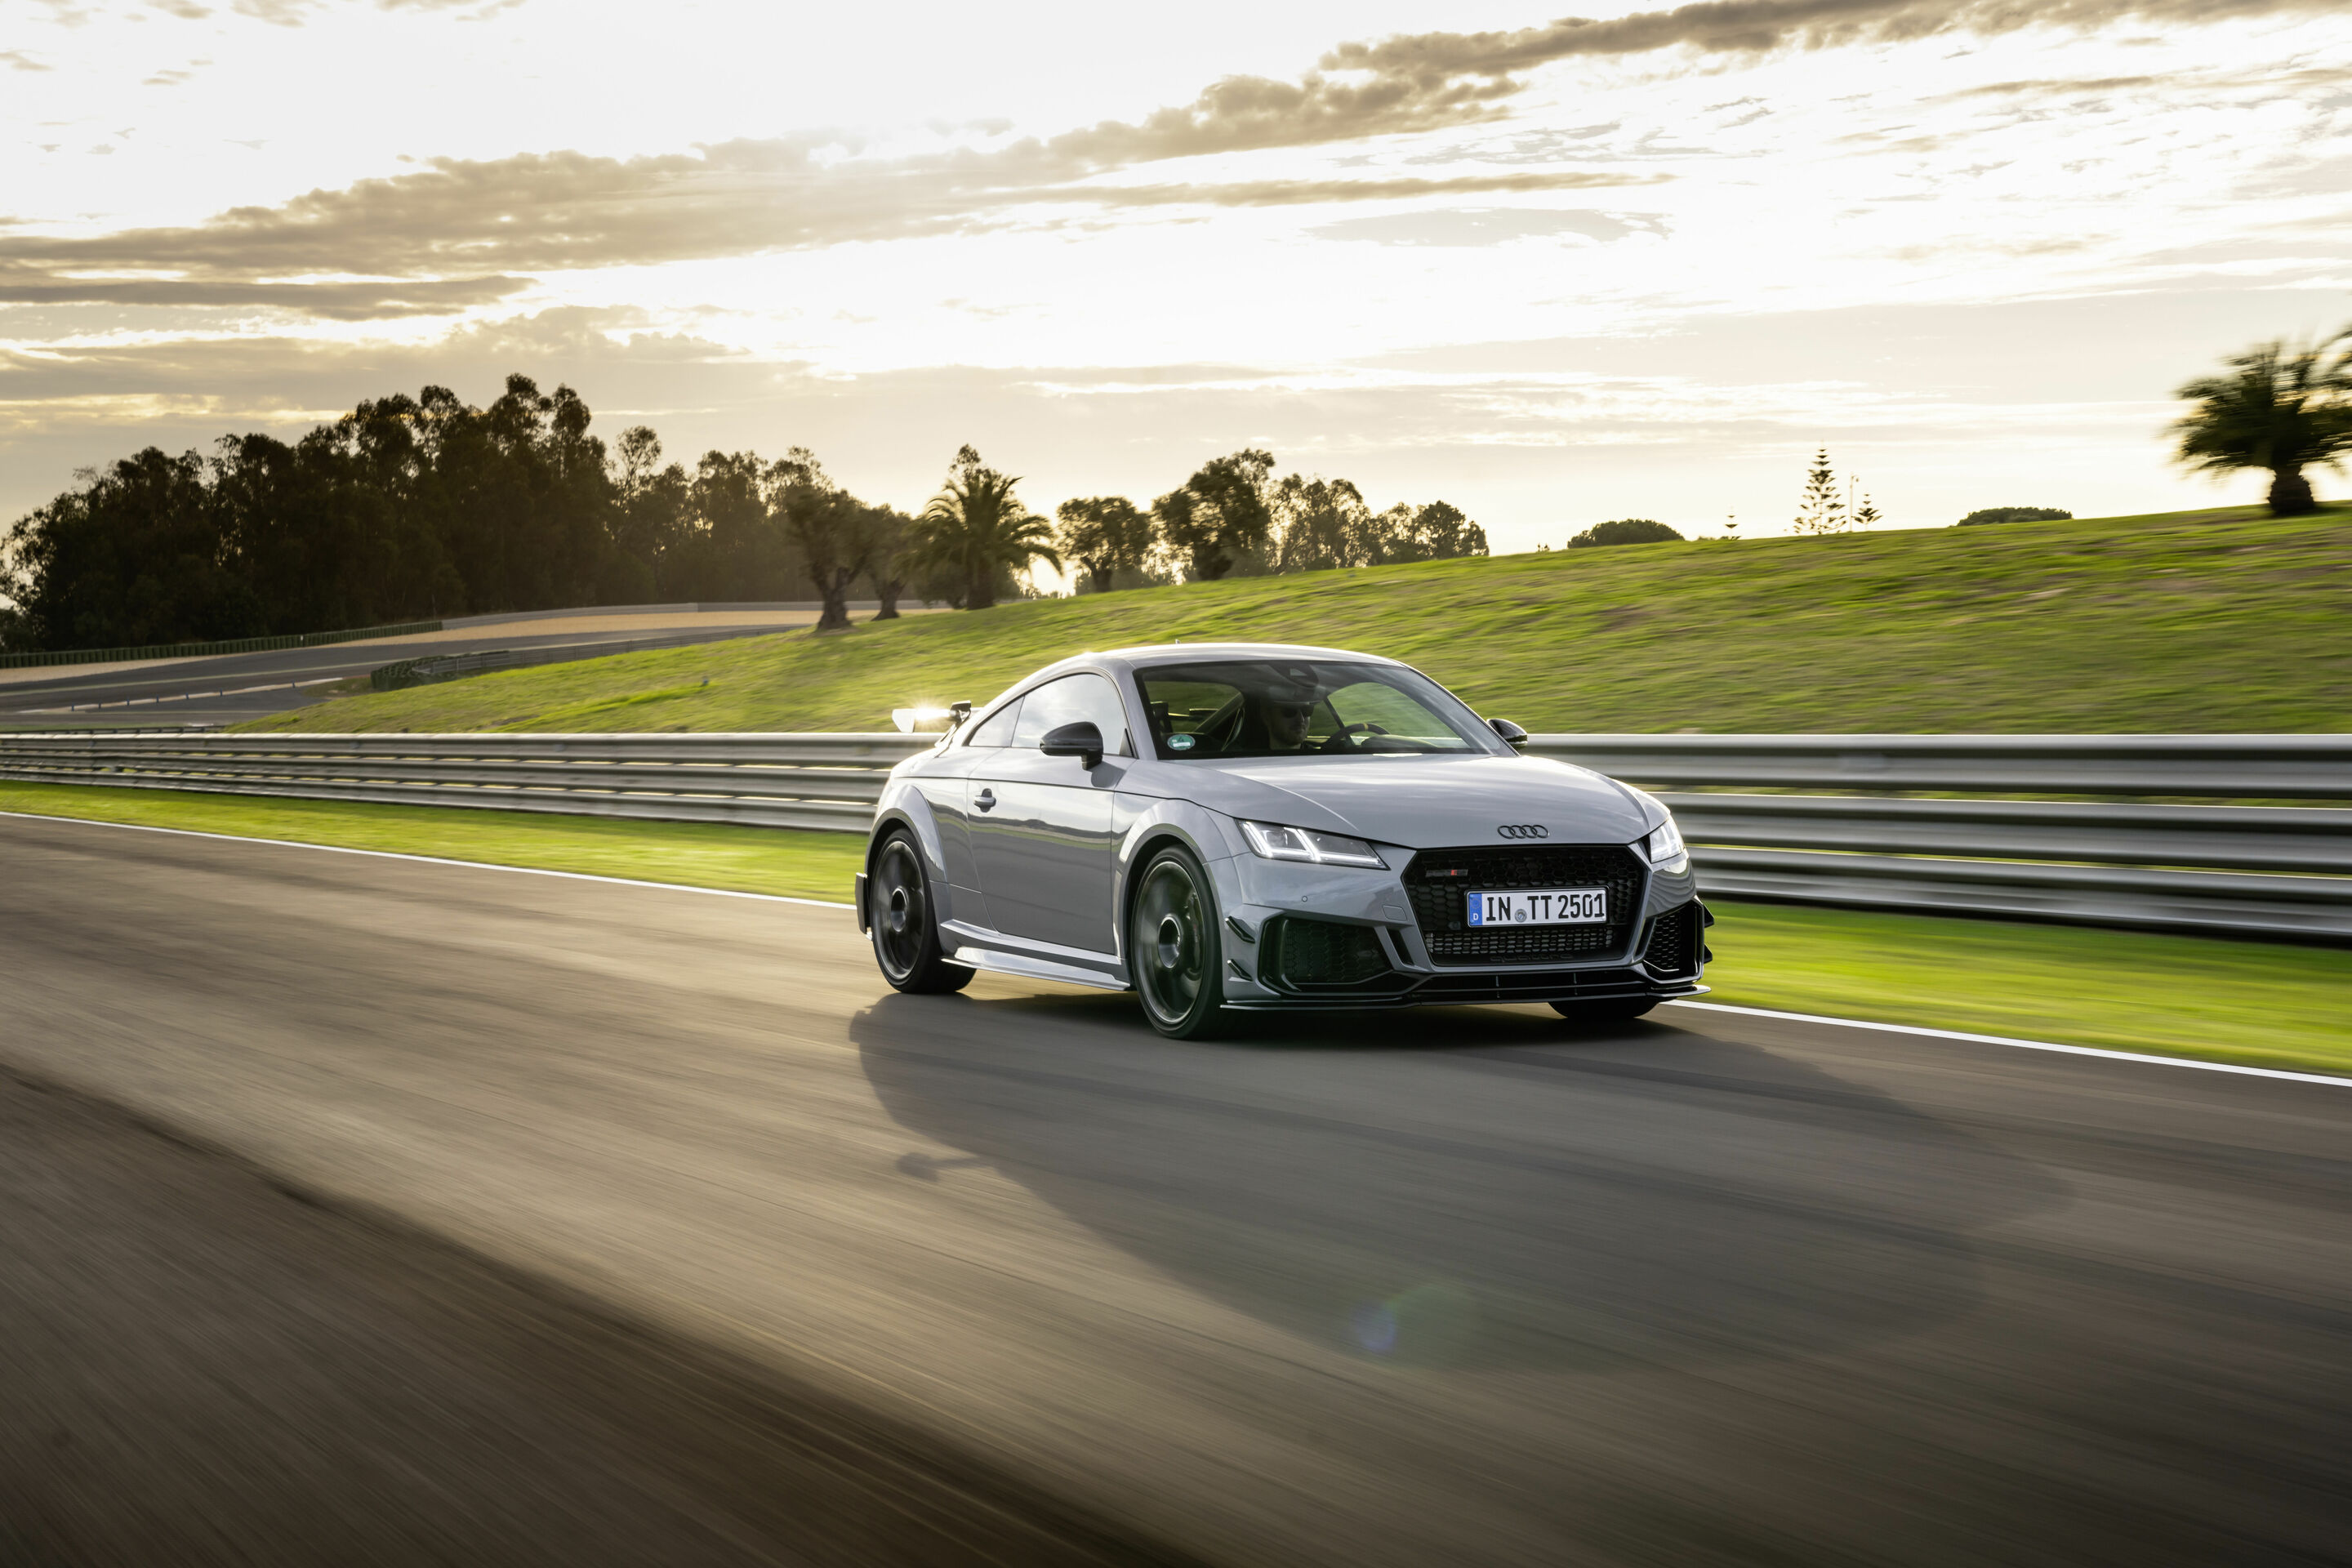 Inspired by Bauhaus Simplicity How Audi TT Became a Design Icon, audi tt